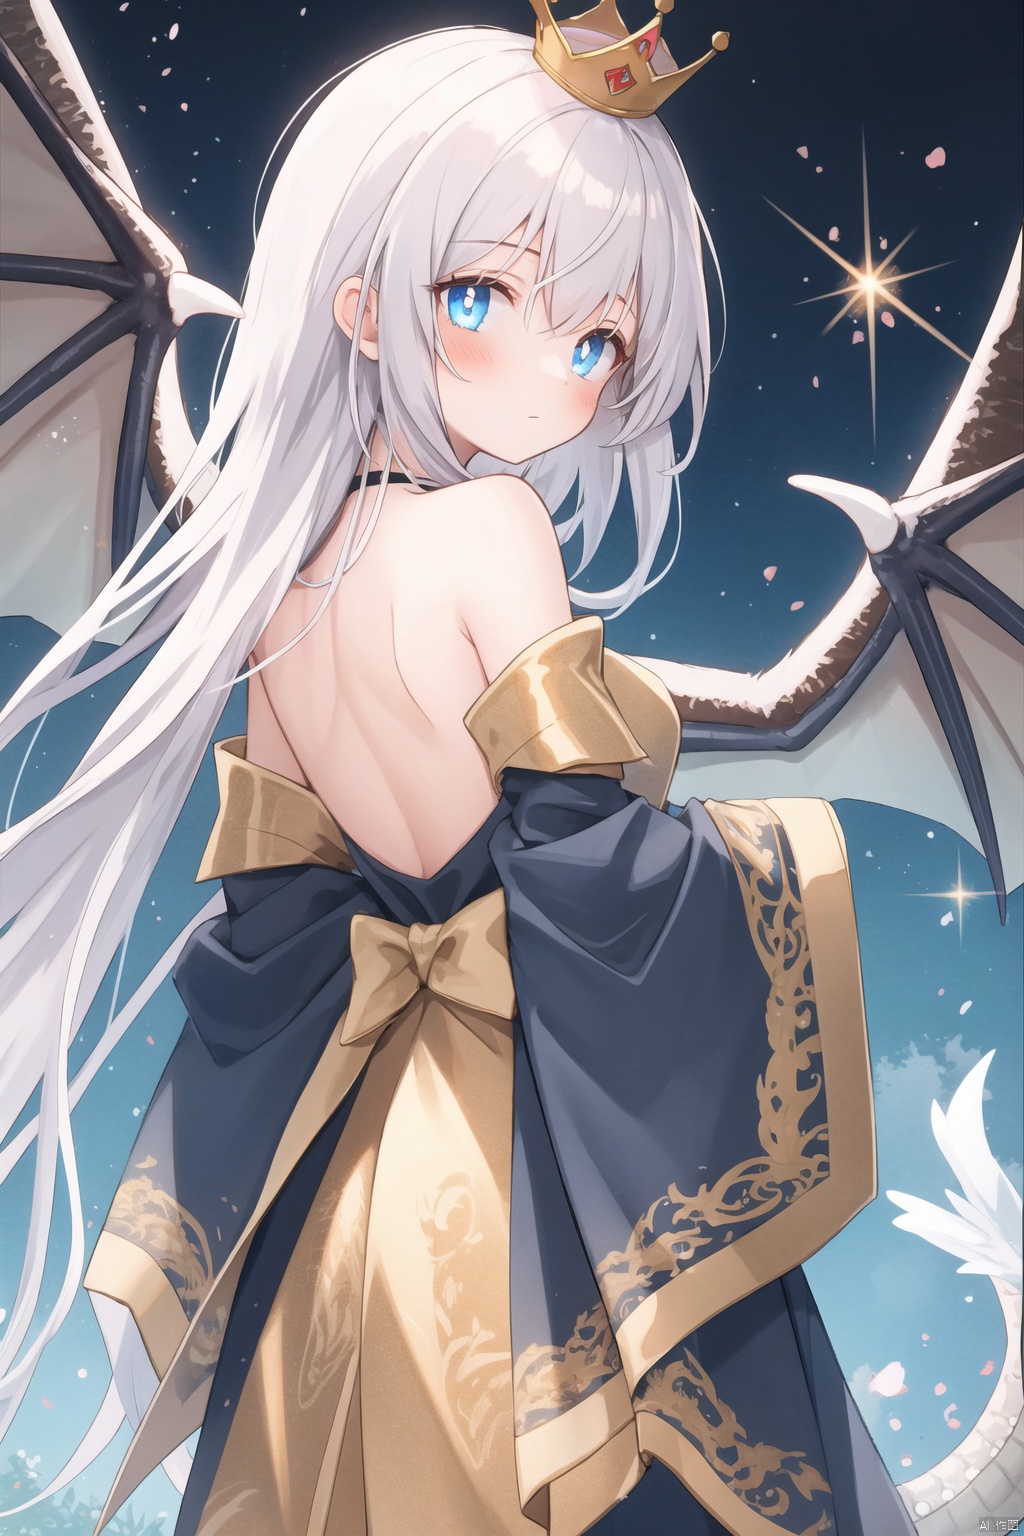  1girl, solo,Dragon beauty, back golden wings,dragon scale body, handsome dragon girl, golden pupils head wearing imperial crown

